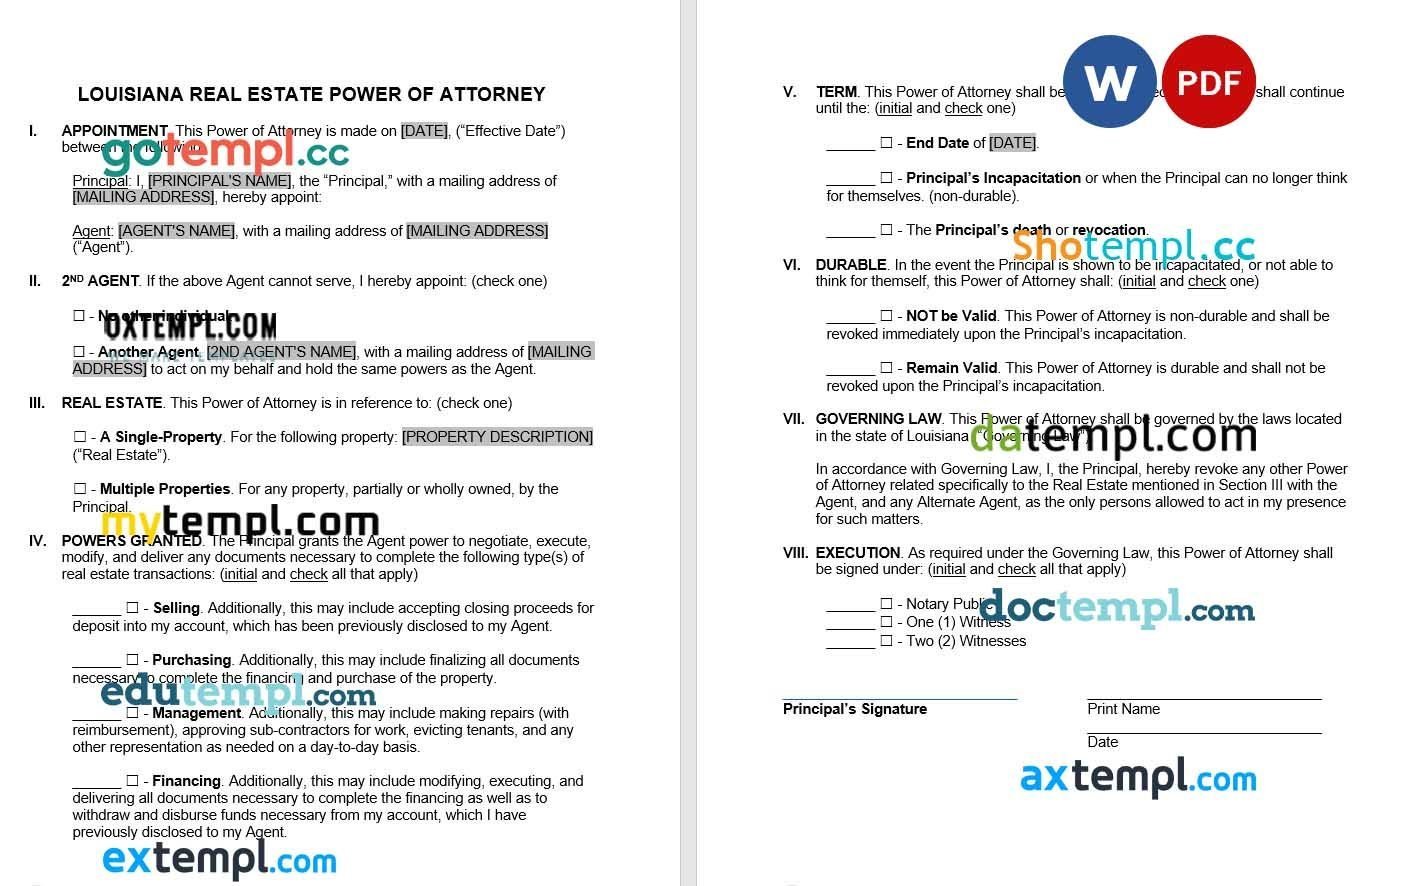 Louisiana Real Estate Power of Attorney Form example, fully editable